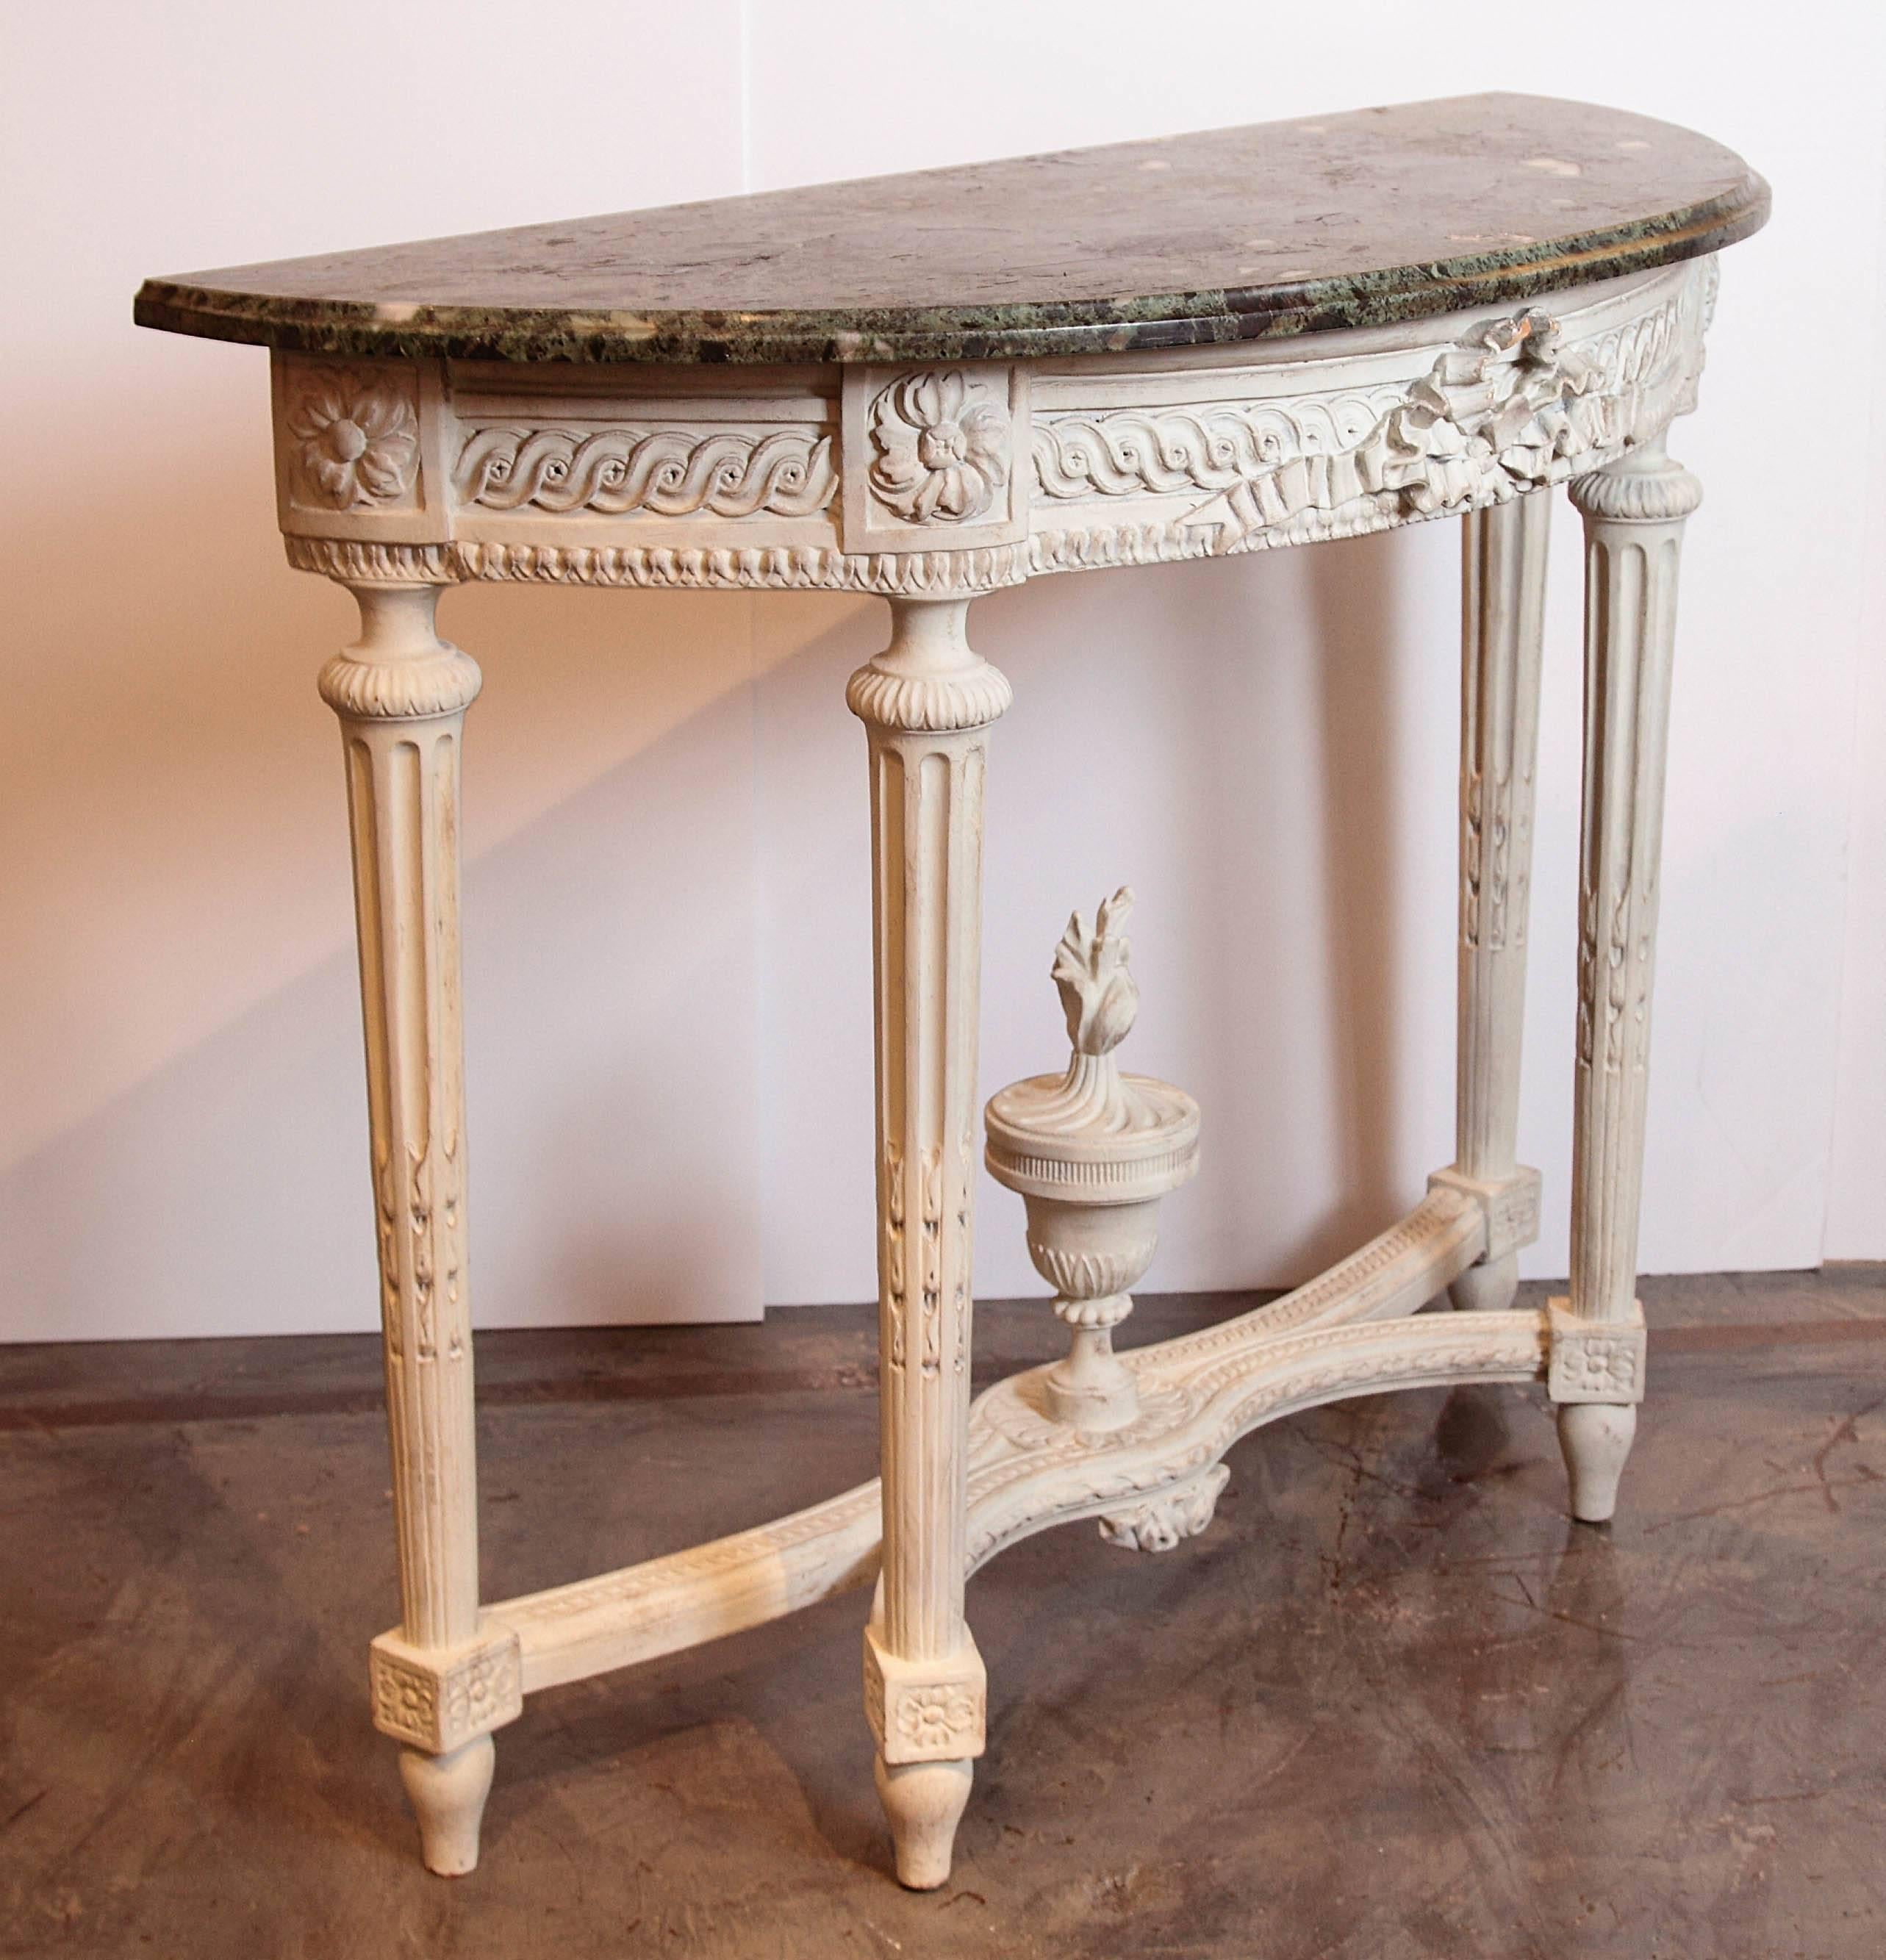 Pair of 19th Century French Louis XVI Painted CrèmeConsoles 1